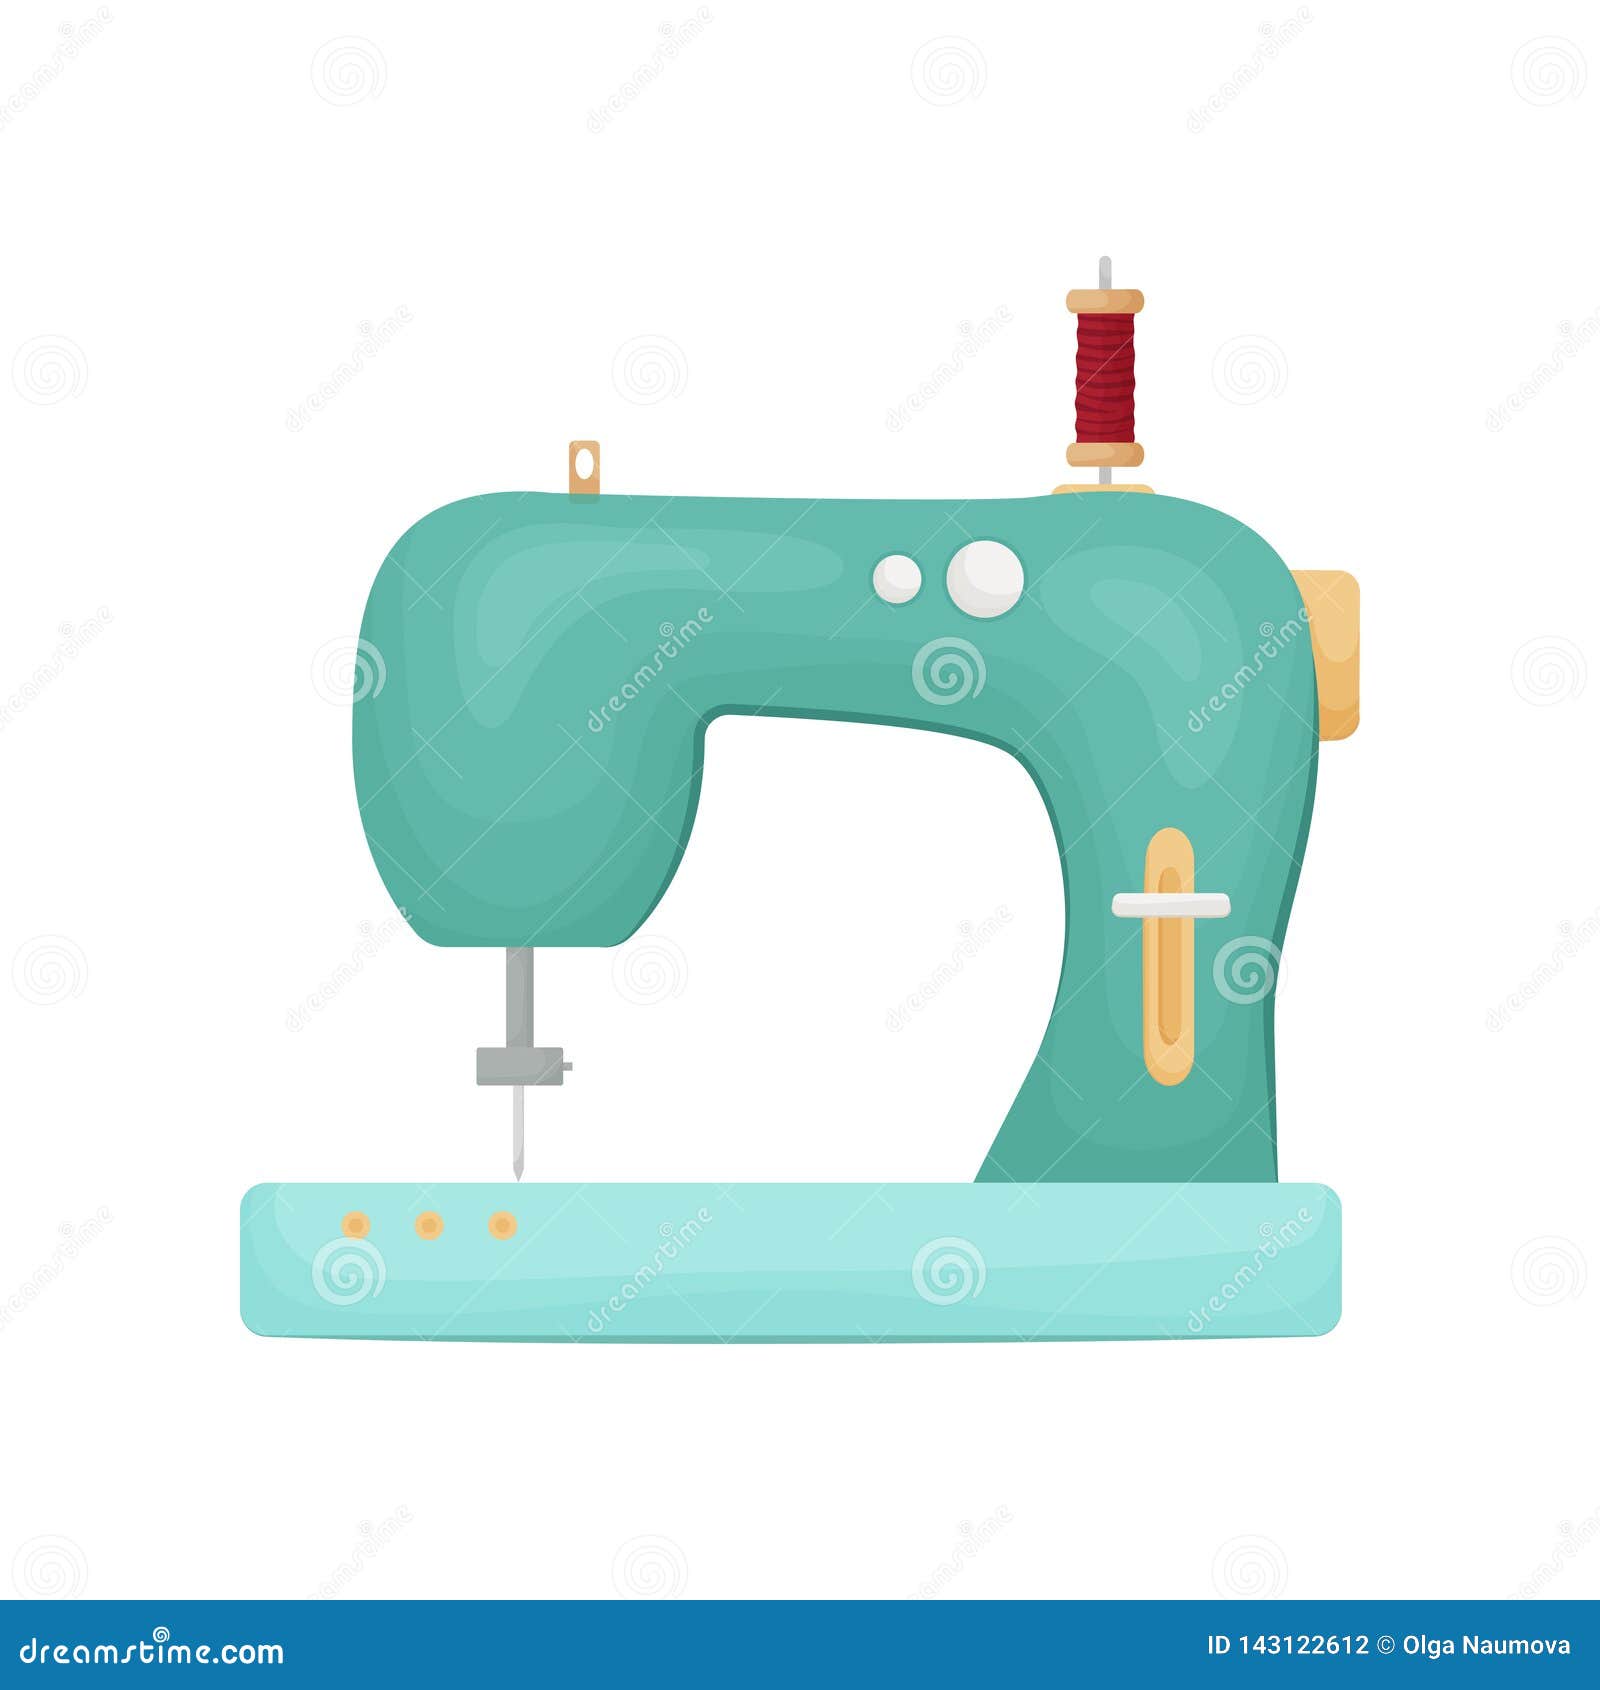 Download Retro Designed Model Of Sewing Machine In Green Color Isolated On White Background Stock Vector ...